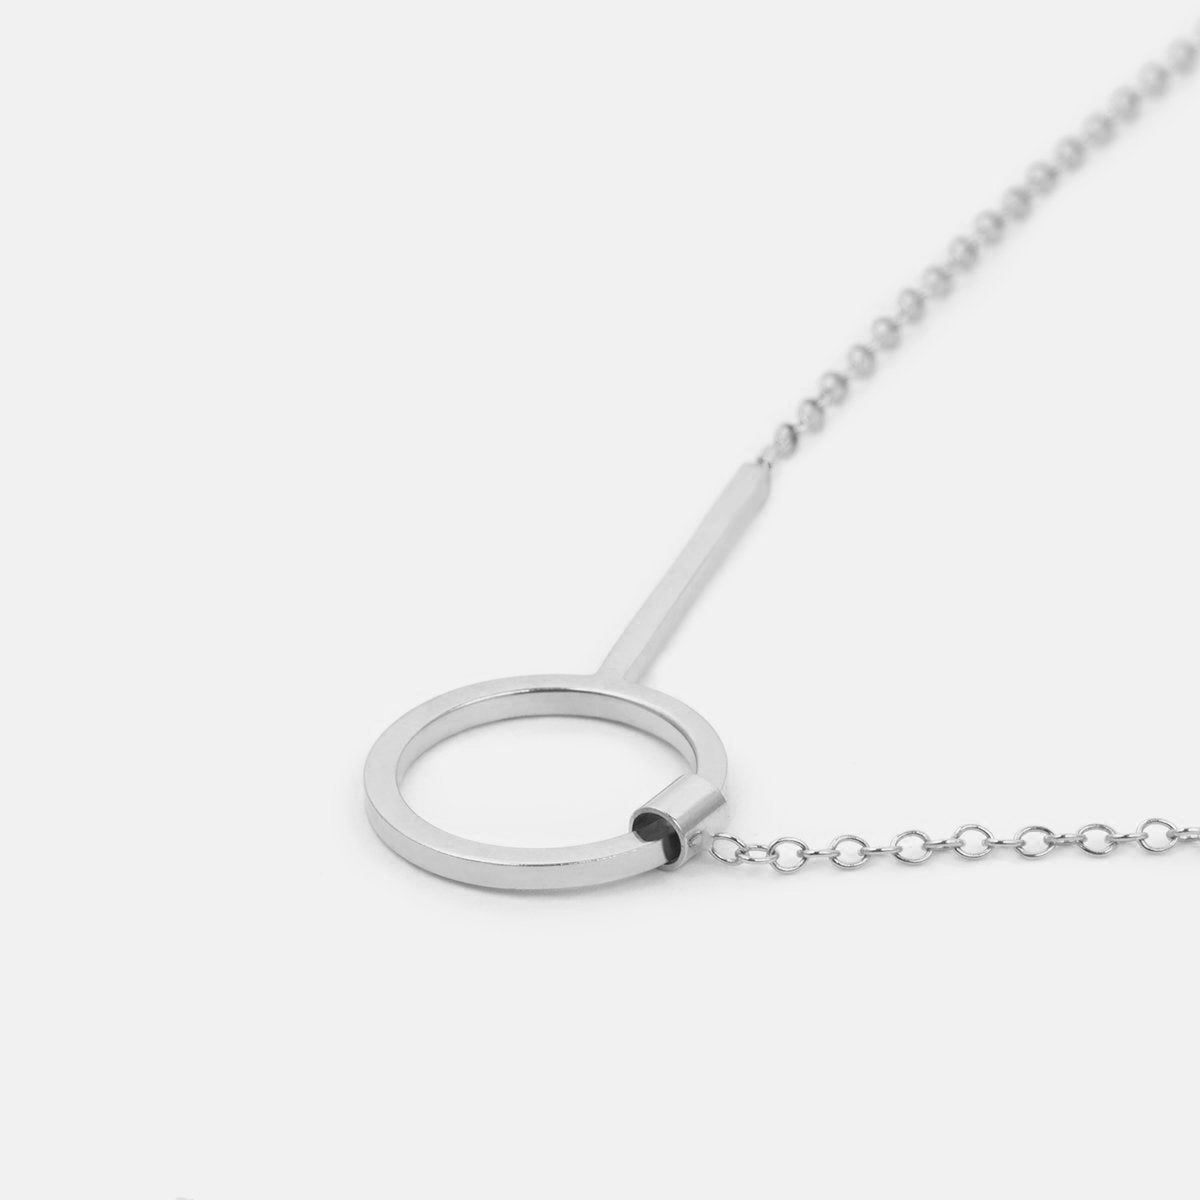 Diena Handmade Necklace in 14k White Gold By SHW Fine Jewelry NYC